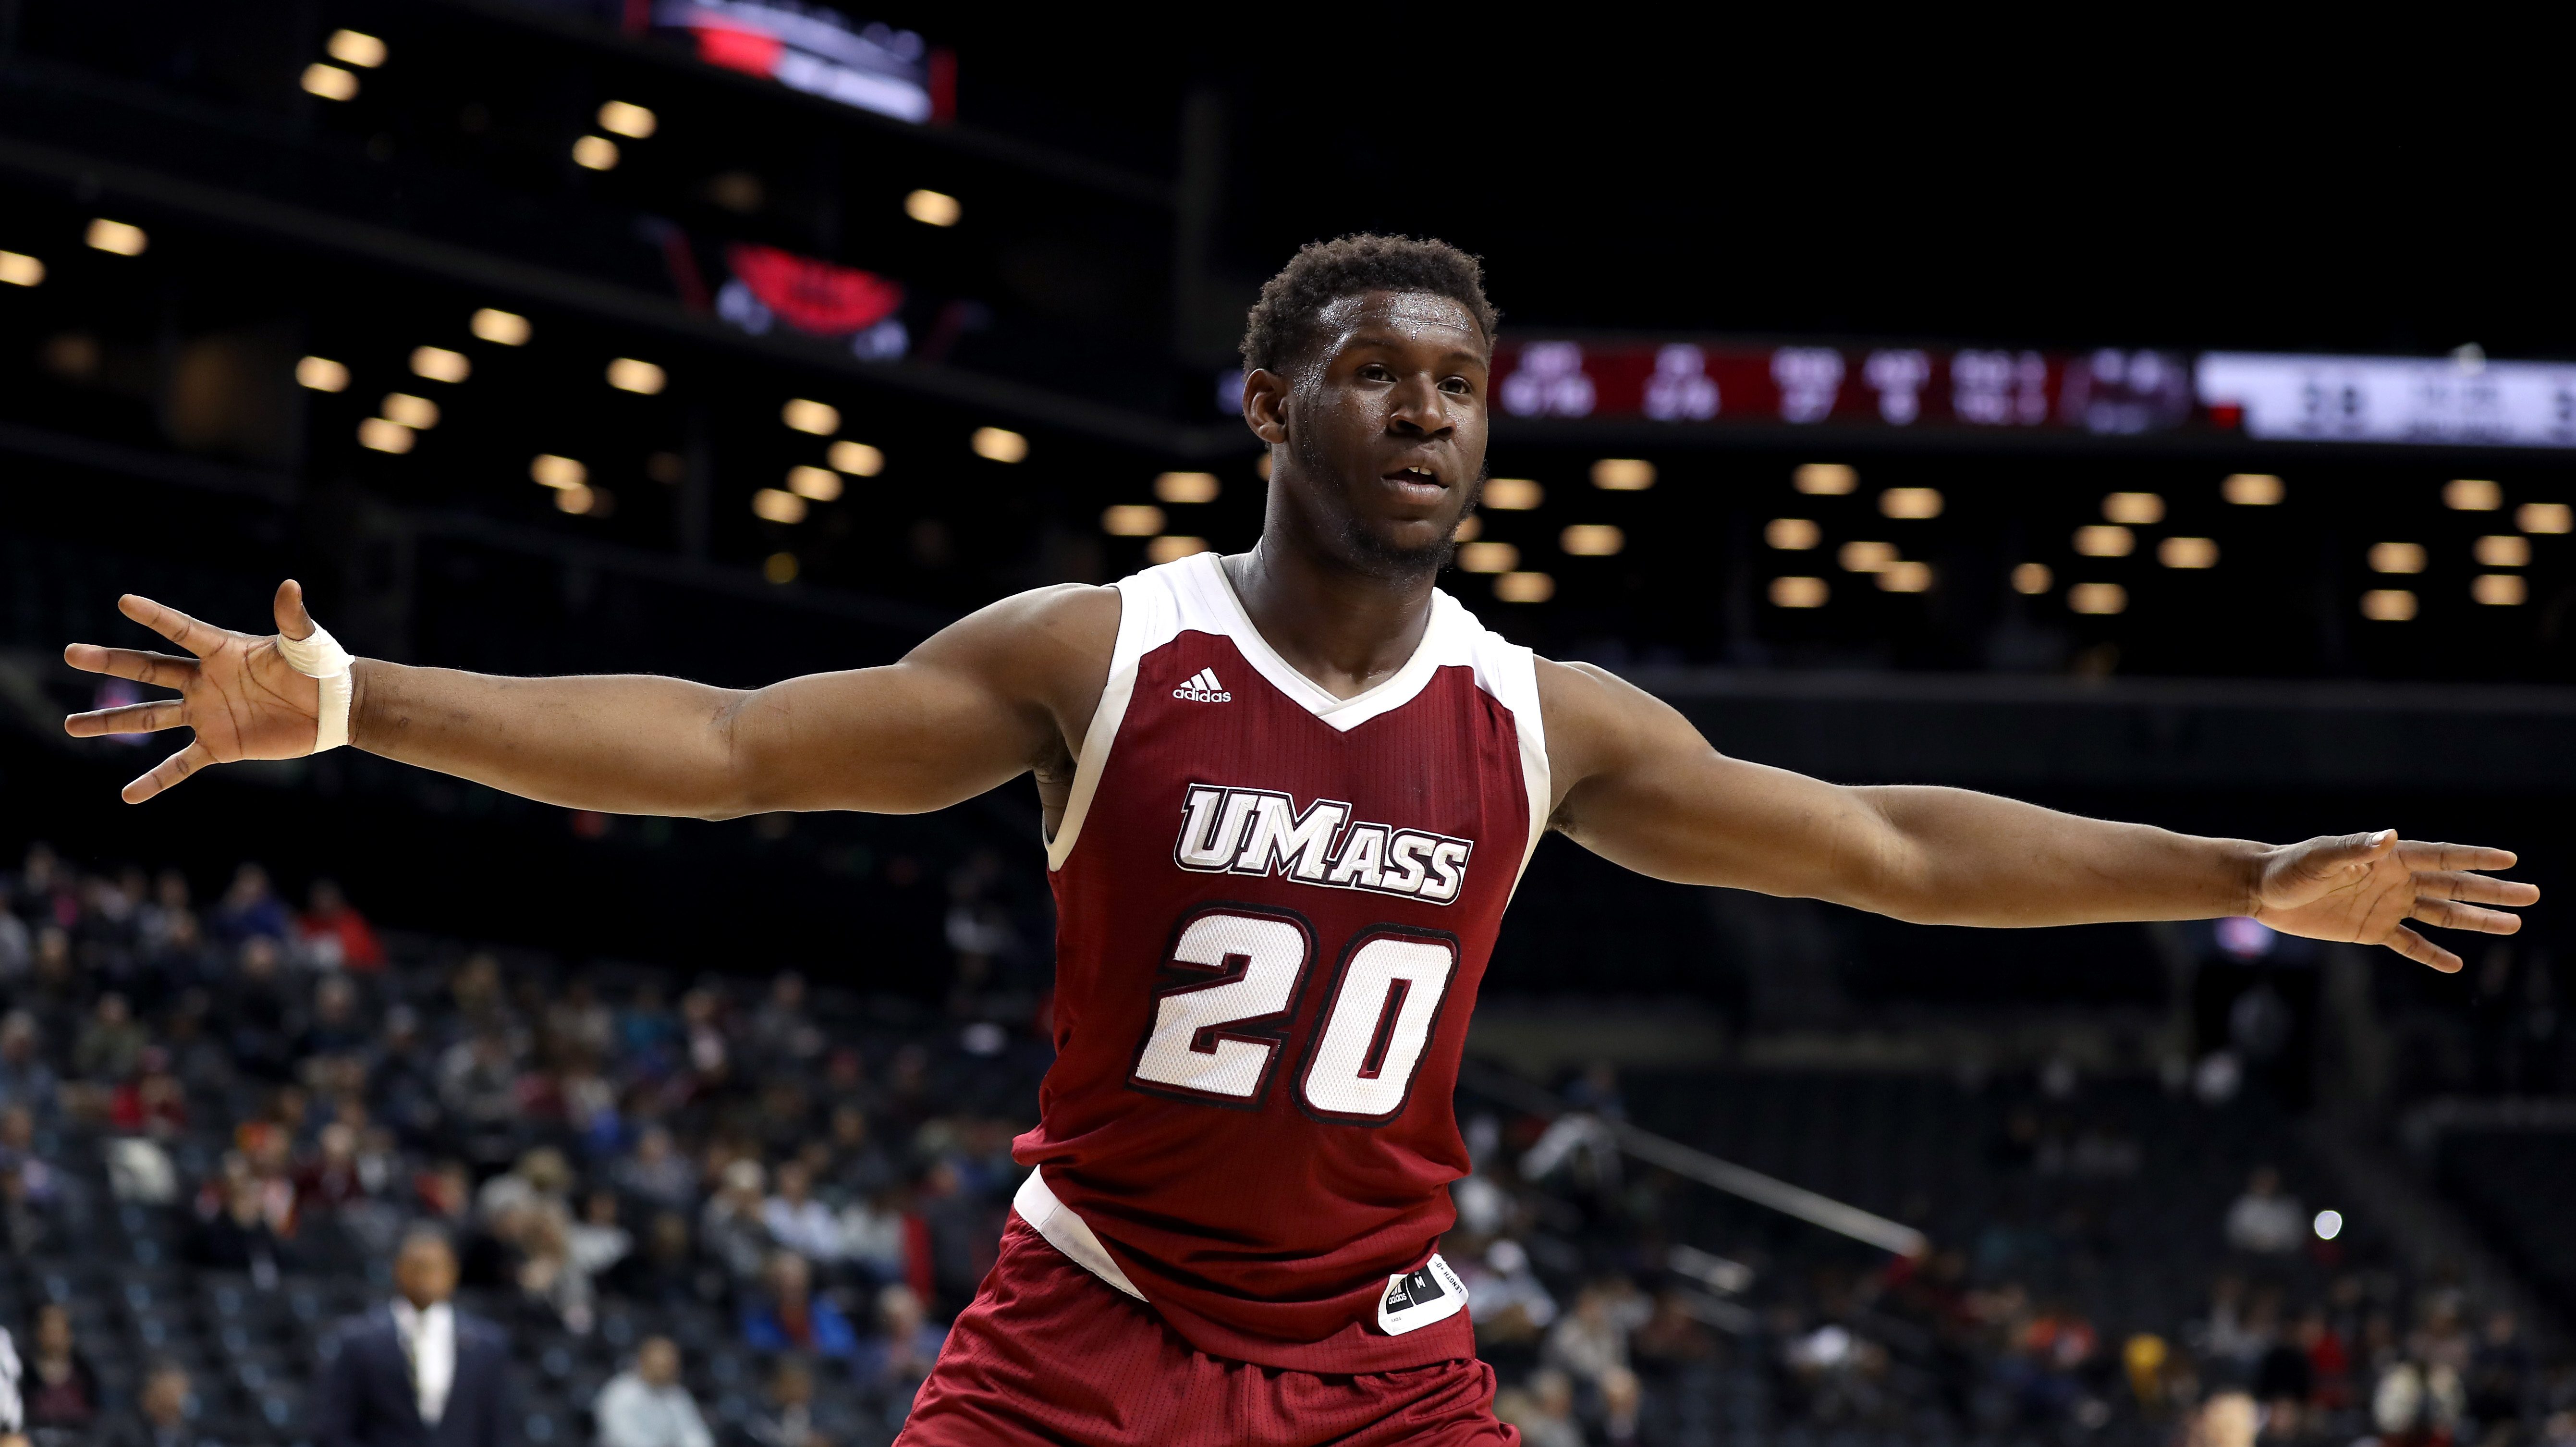 How to Watch Duquesne vs UMass Basketball on ESPN Plus